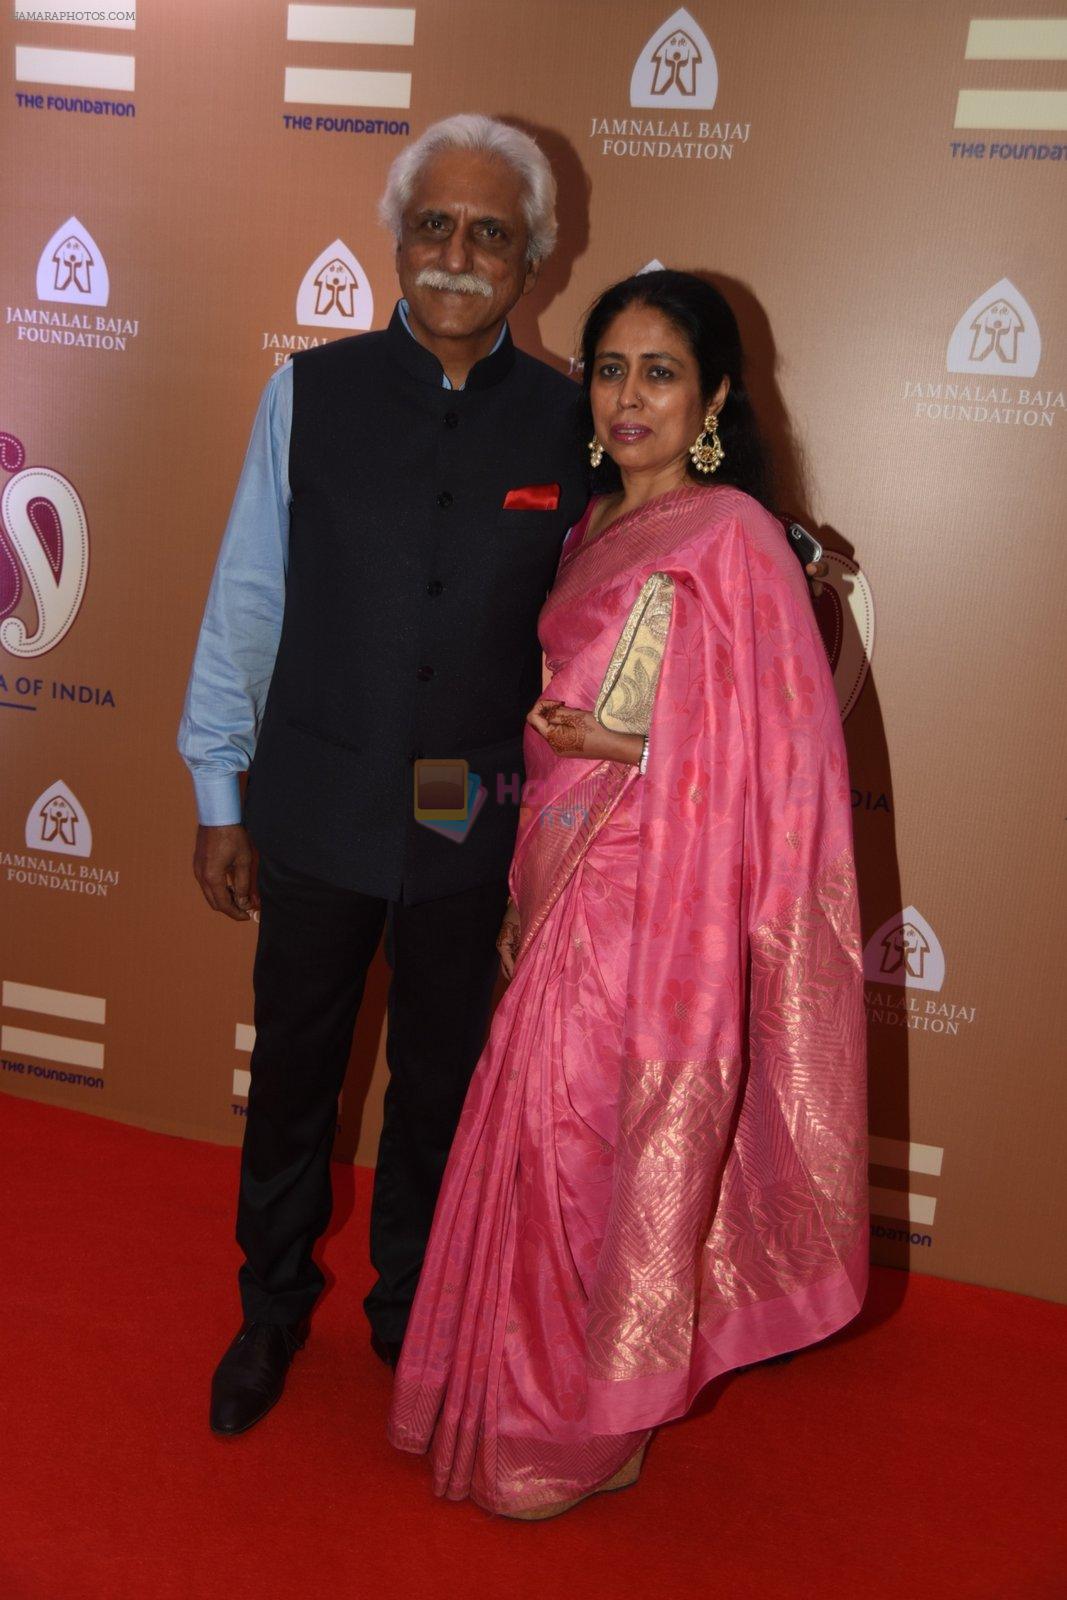 Ayaz Memon with wife at Rahul Bose auction Event on 19th Feb 2016